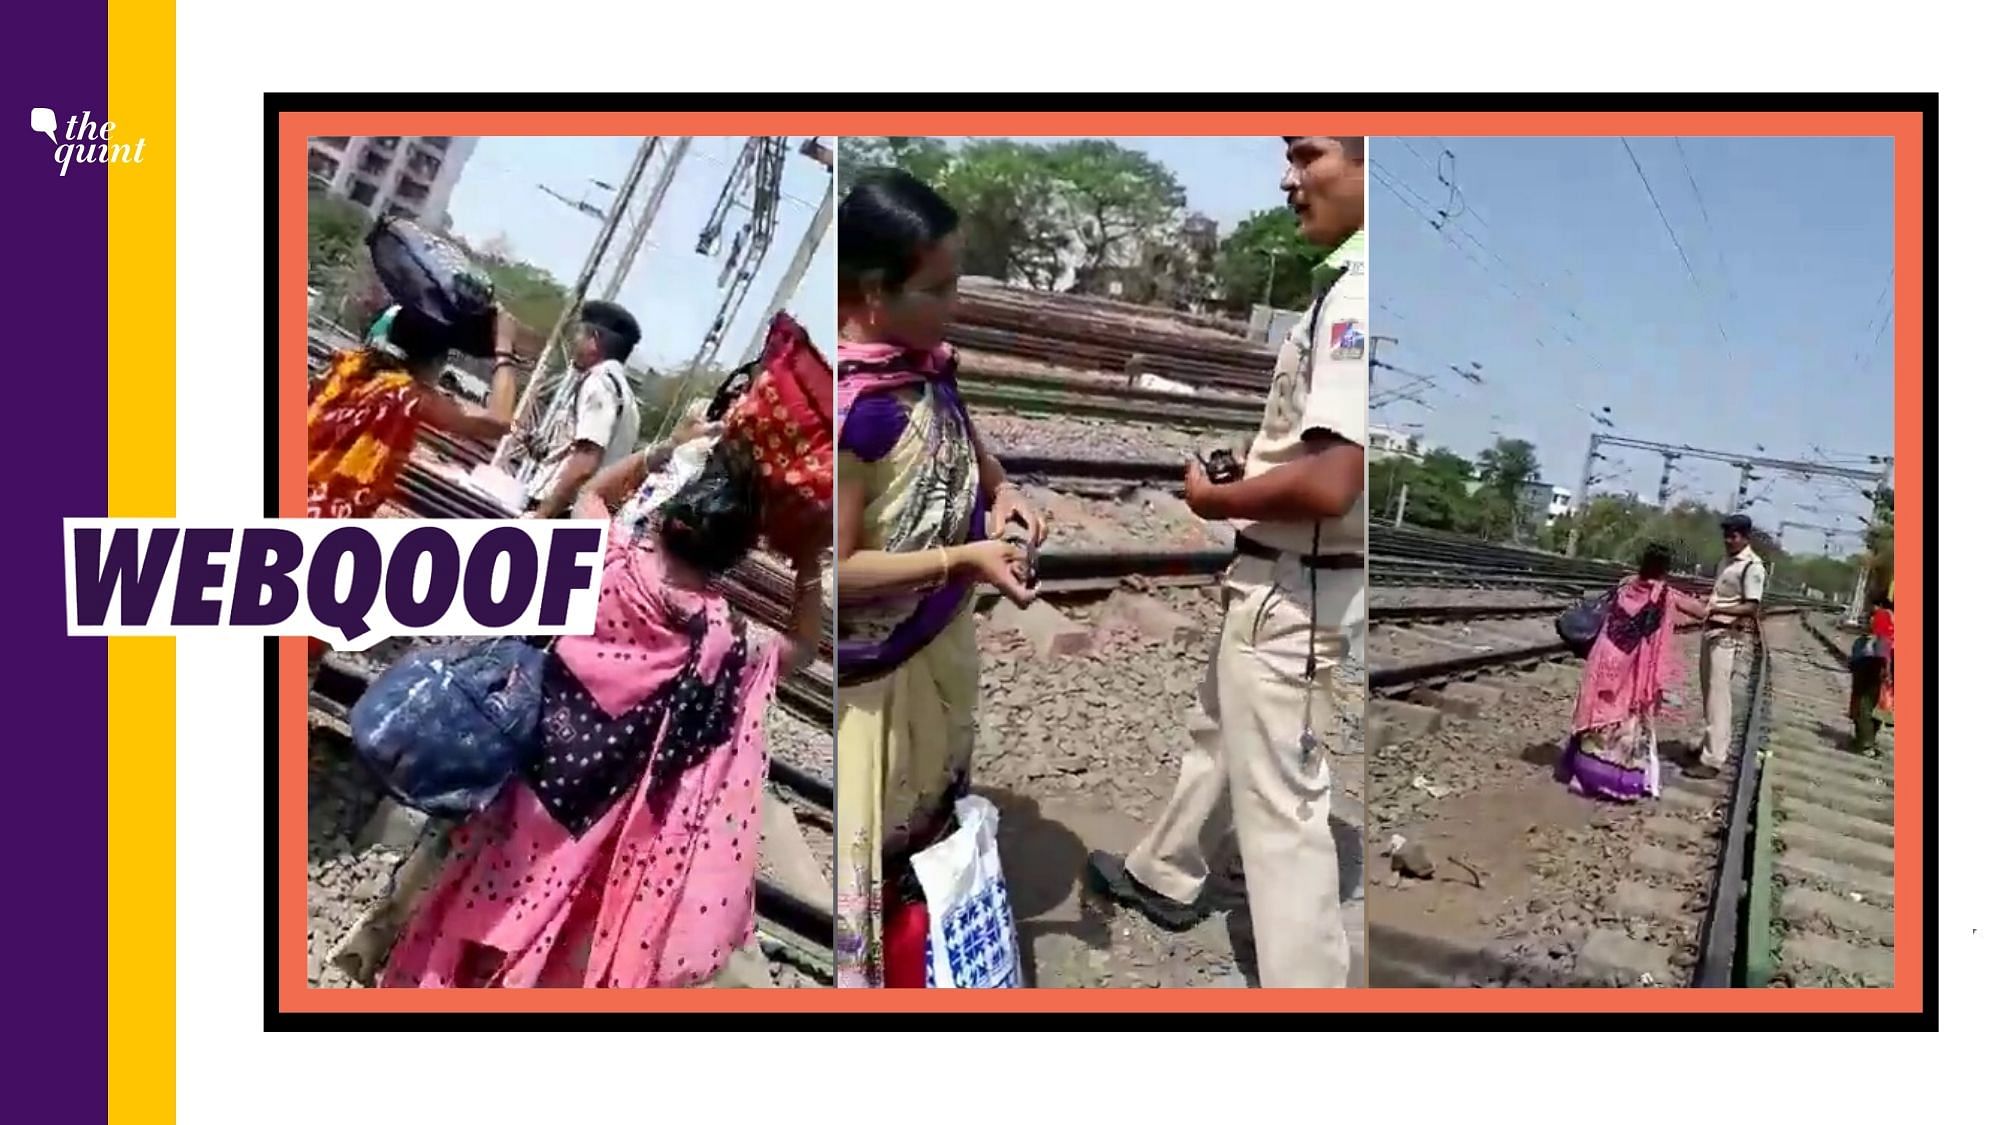 The video is from 2019 and it shows an RPF personnel accepting bribe from women bootleggers in Surat.